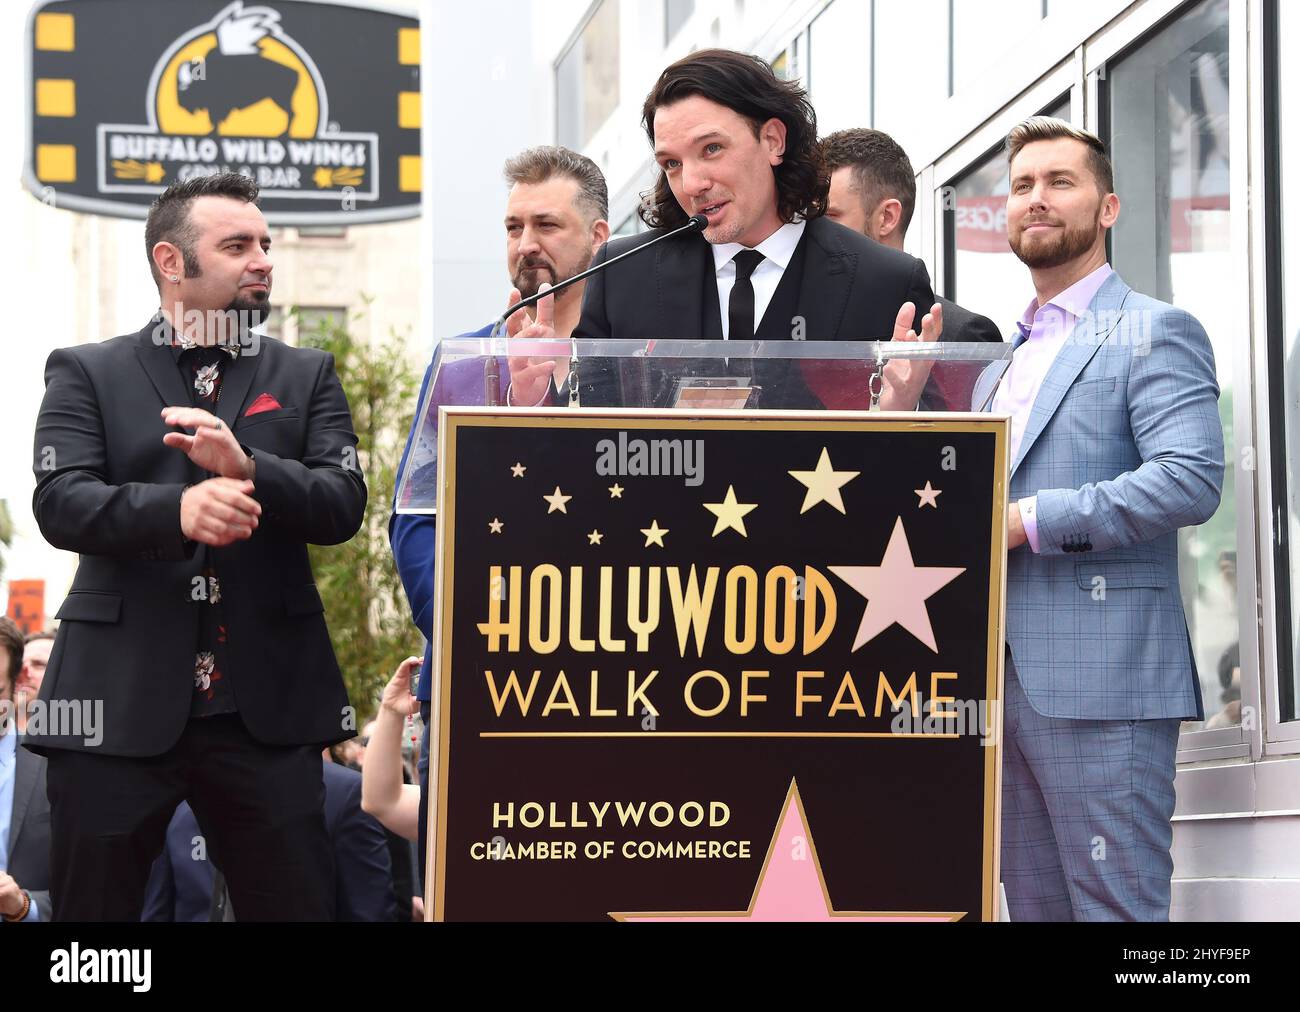 NSYNC, Chris Kirkpatrick, Joey Fatone, JC Chasez, Justin Timberlake and Lance Bass attends the NSYNC walk of fame ceremony held on Hollywood Blvd near LaBrea on April 30, 2018 in Hollywood, CA Stock Photo